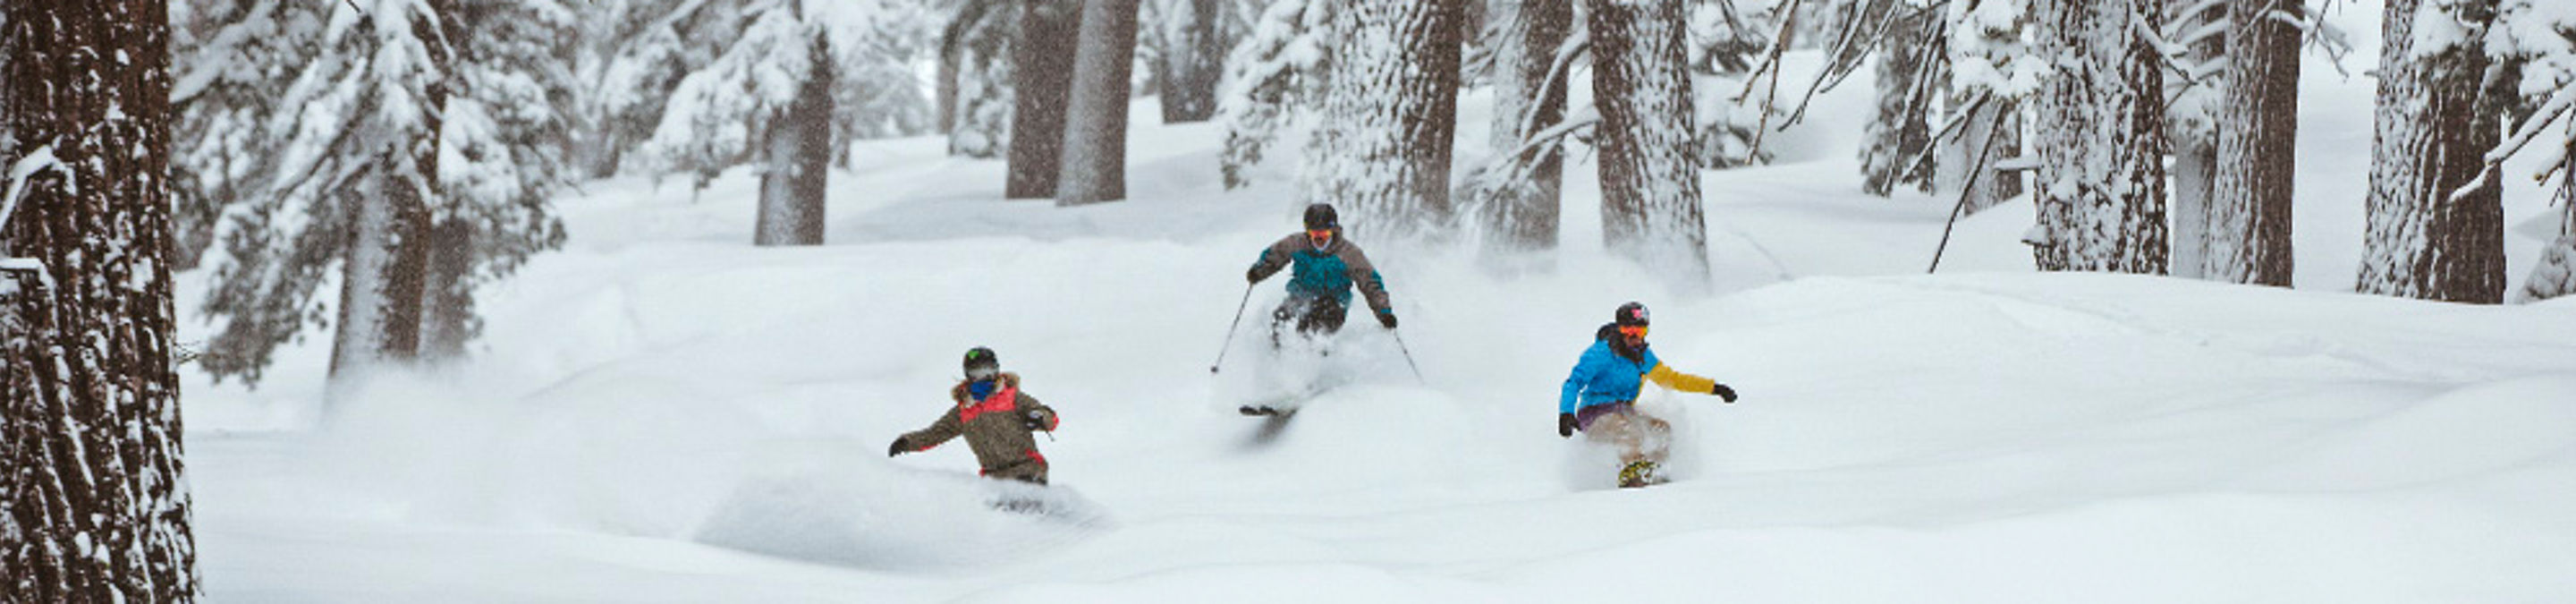 Three Riders in Powder through Trees at Heavenly